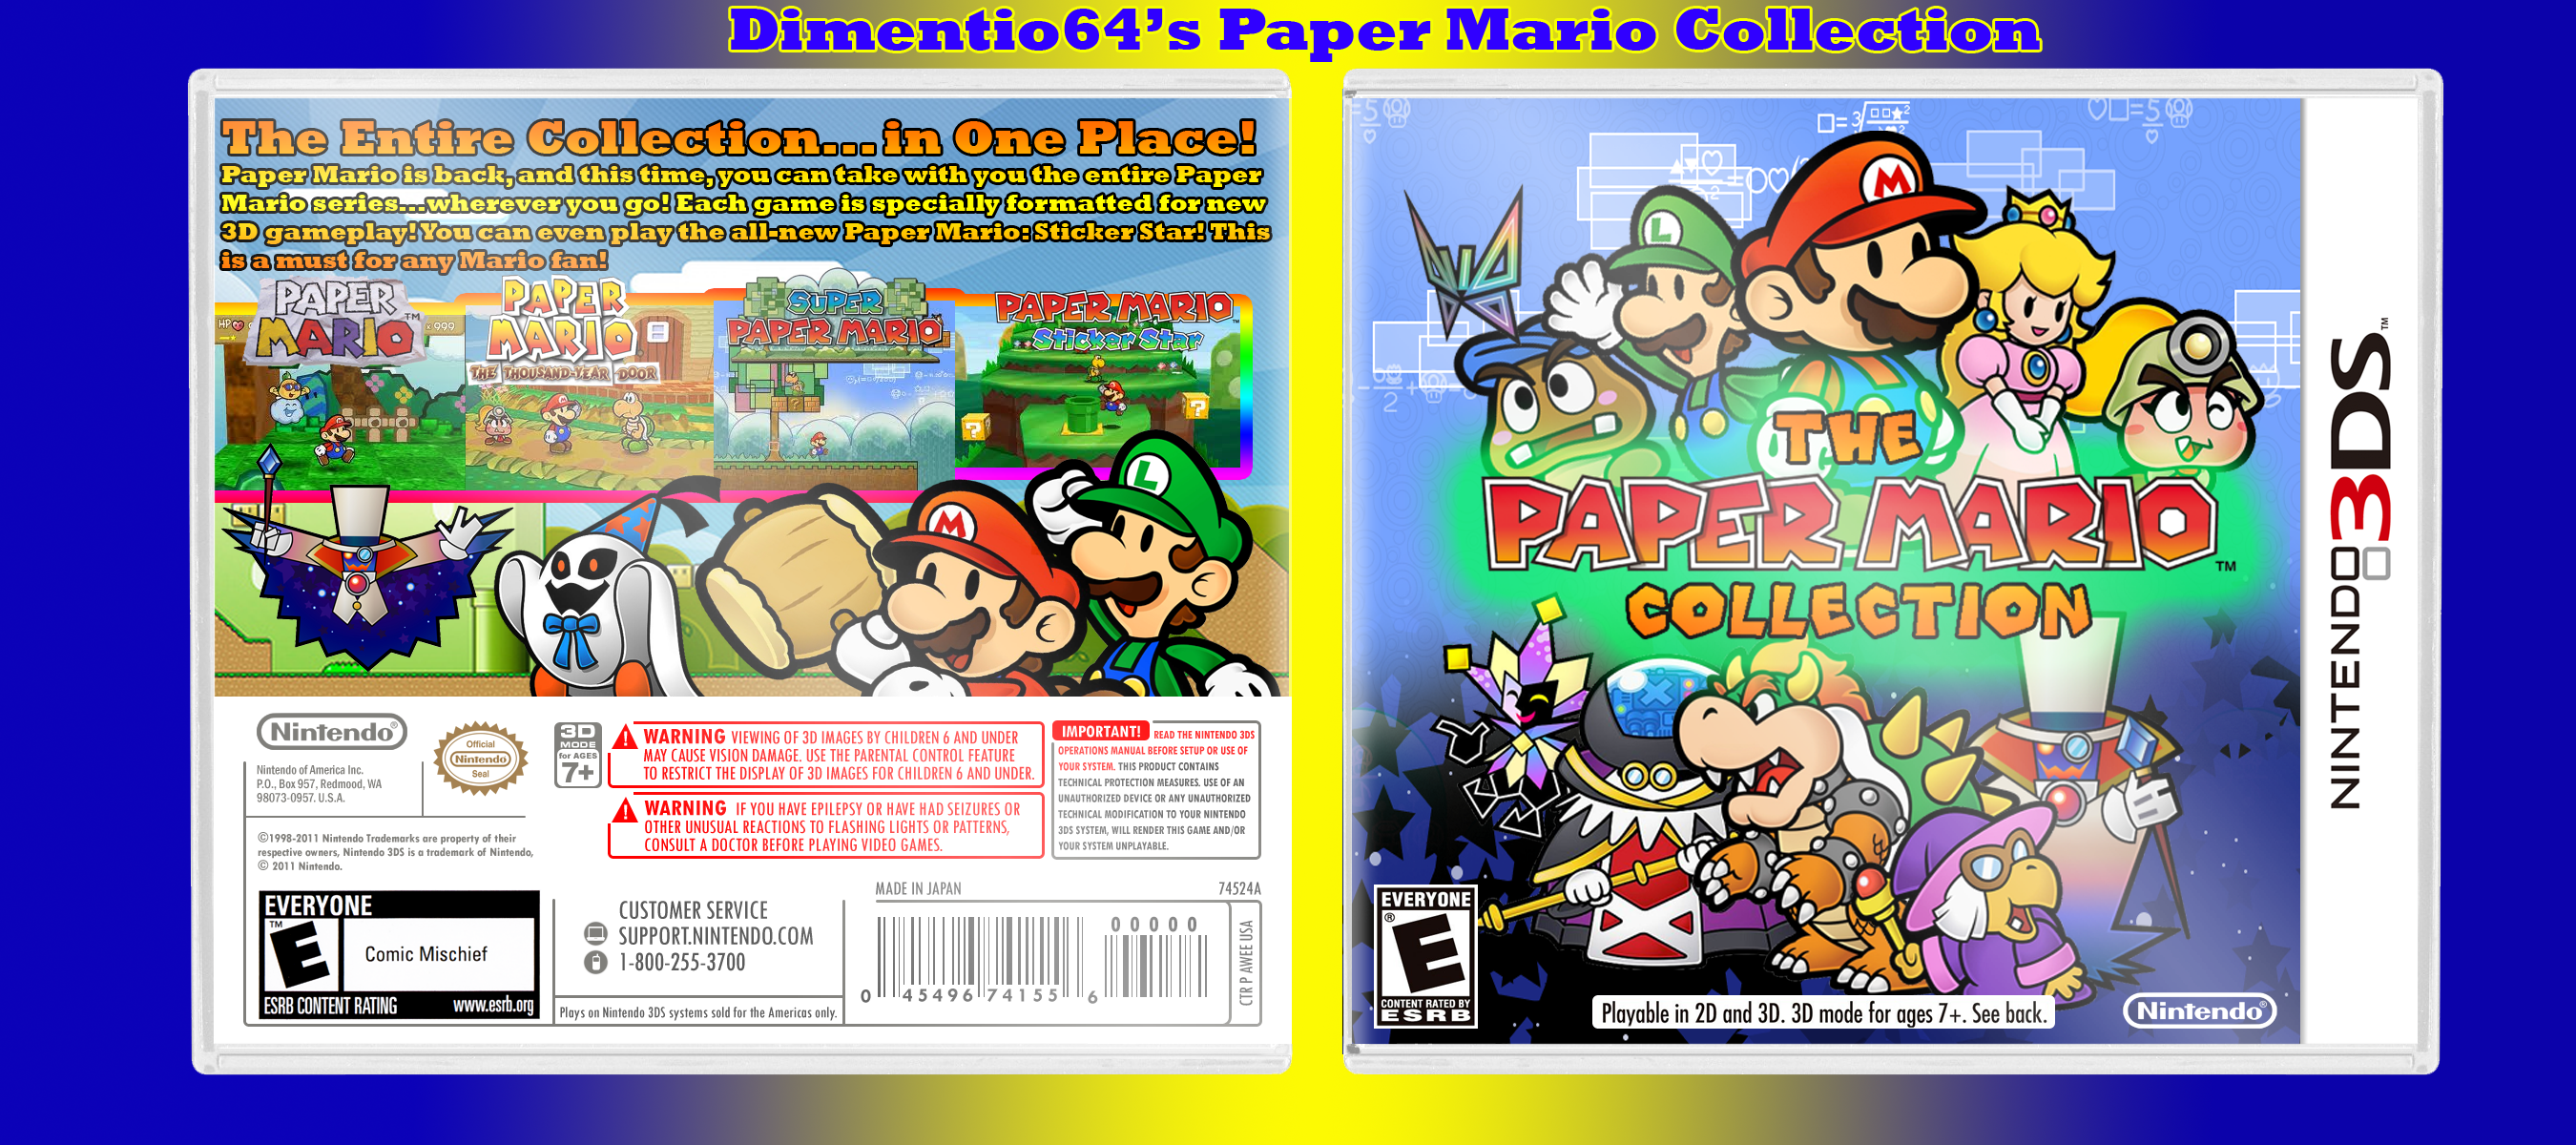 The Paper Mario Collection box cover